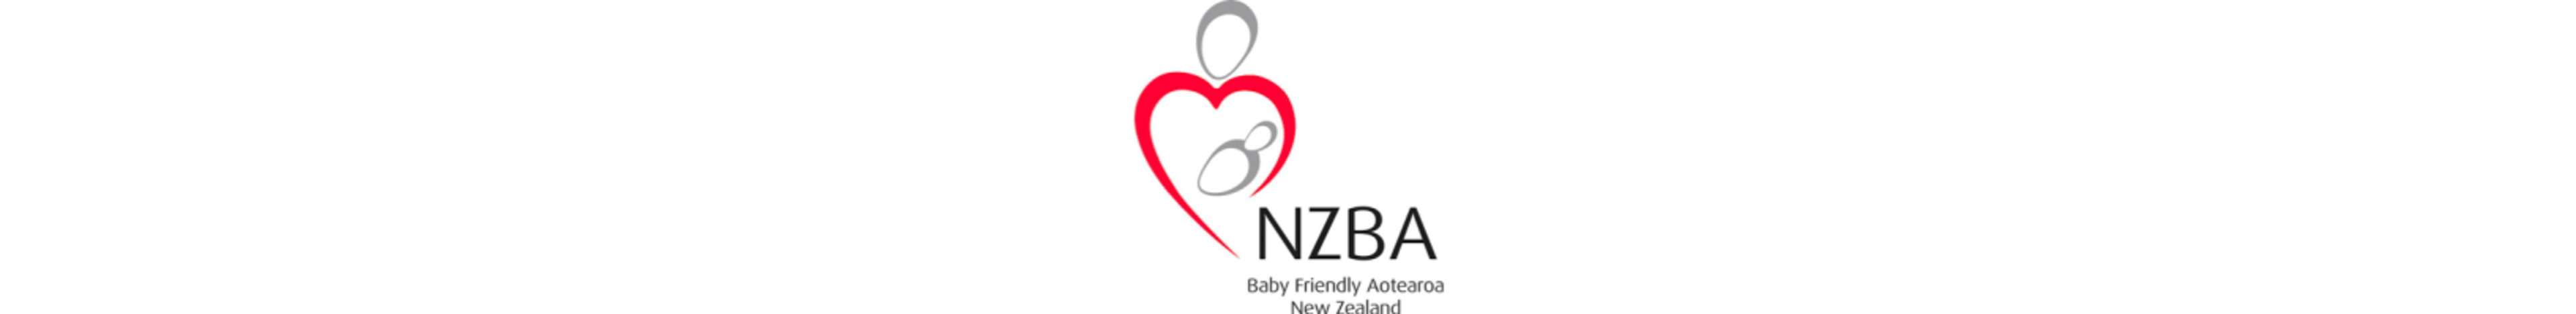 Supported by NZBA